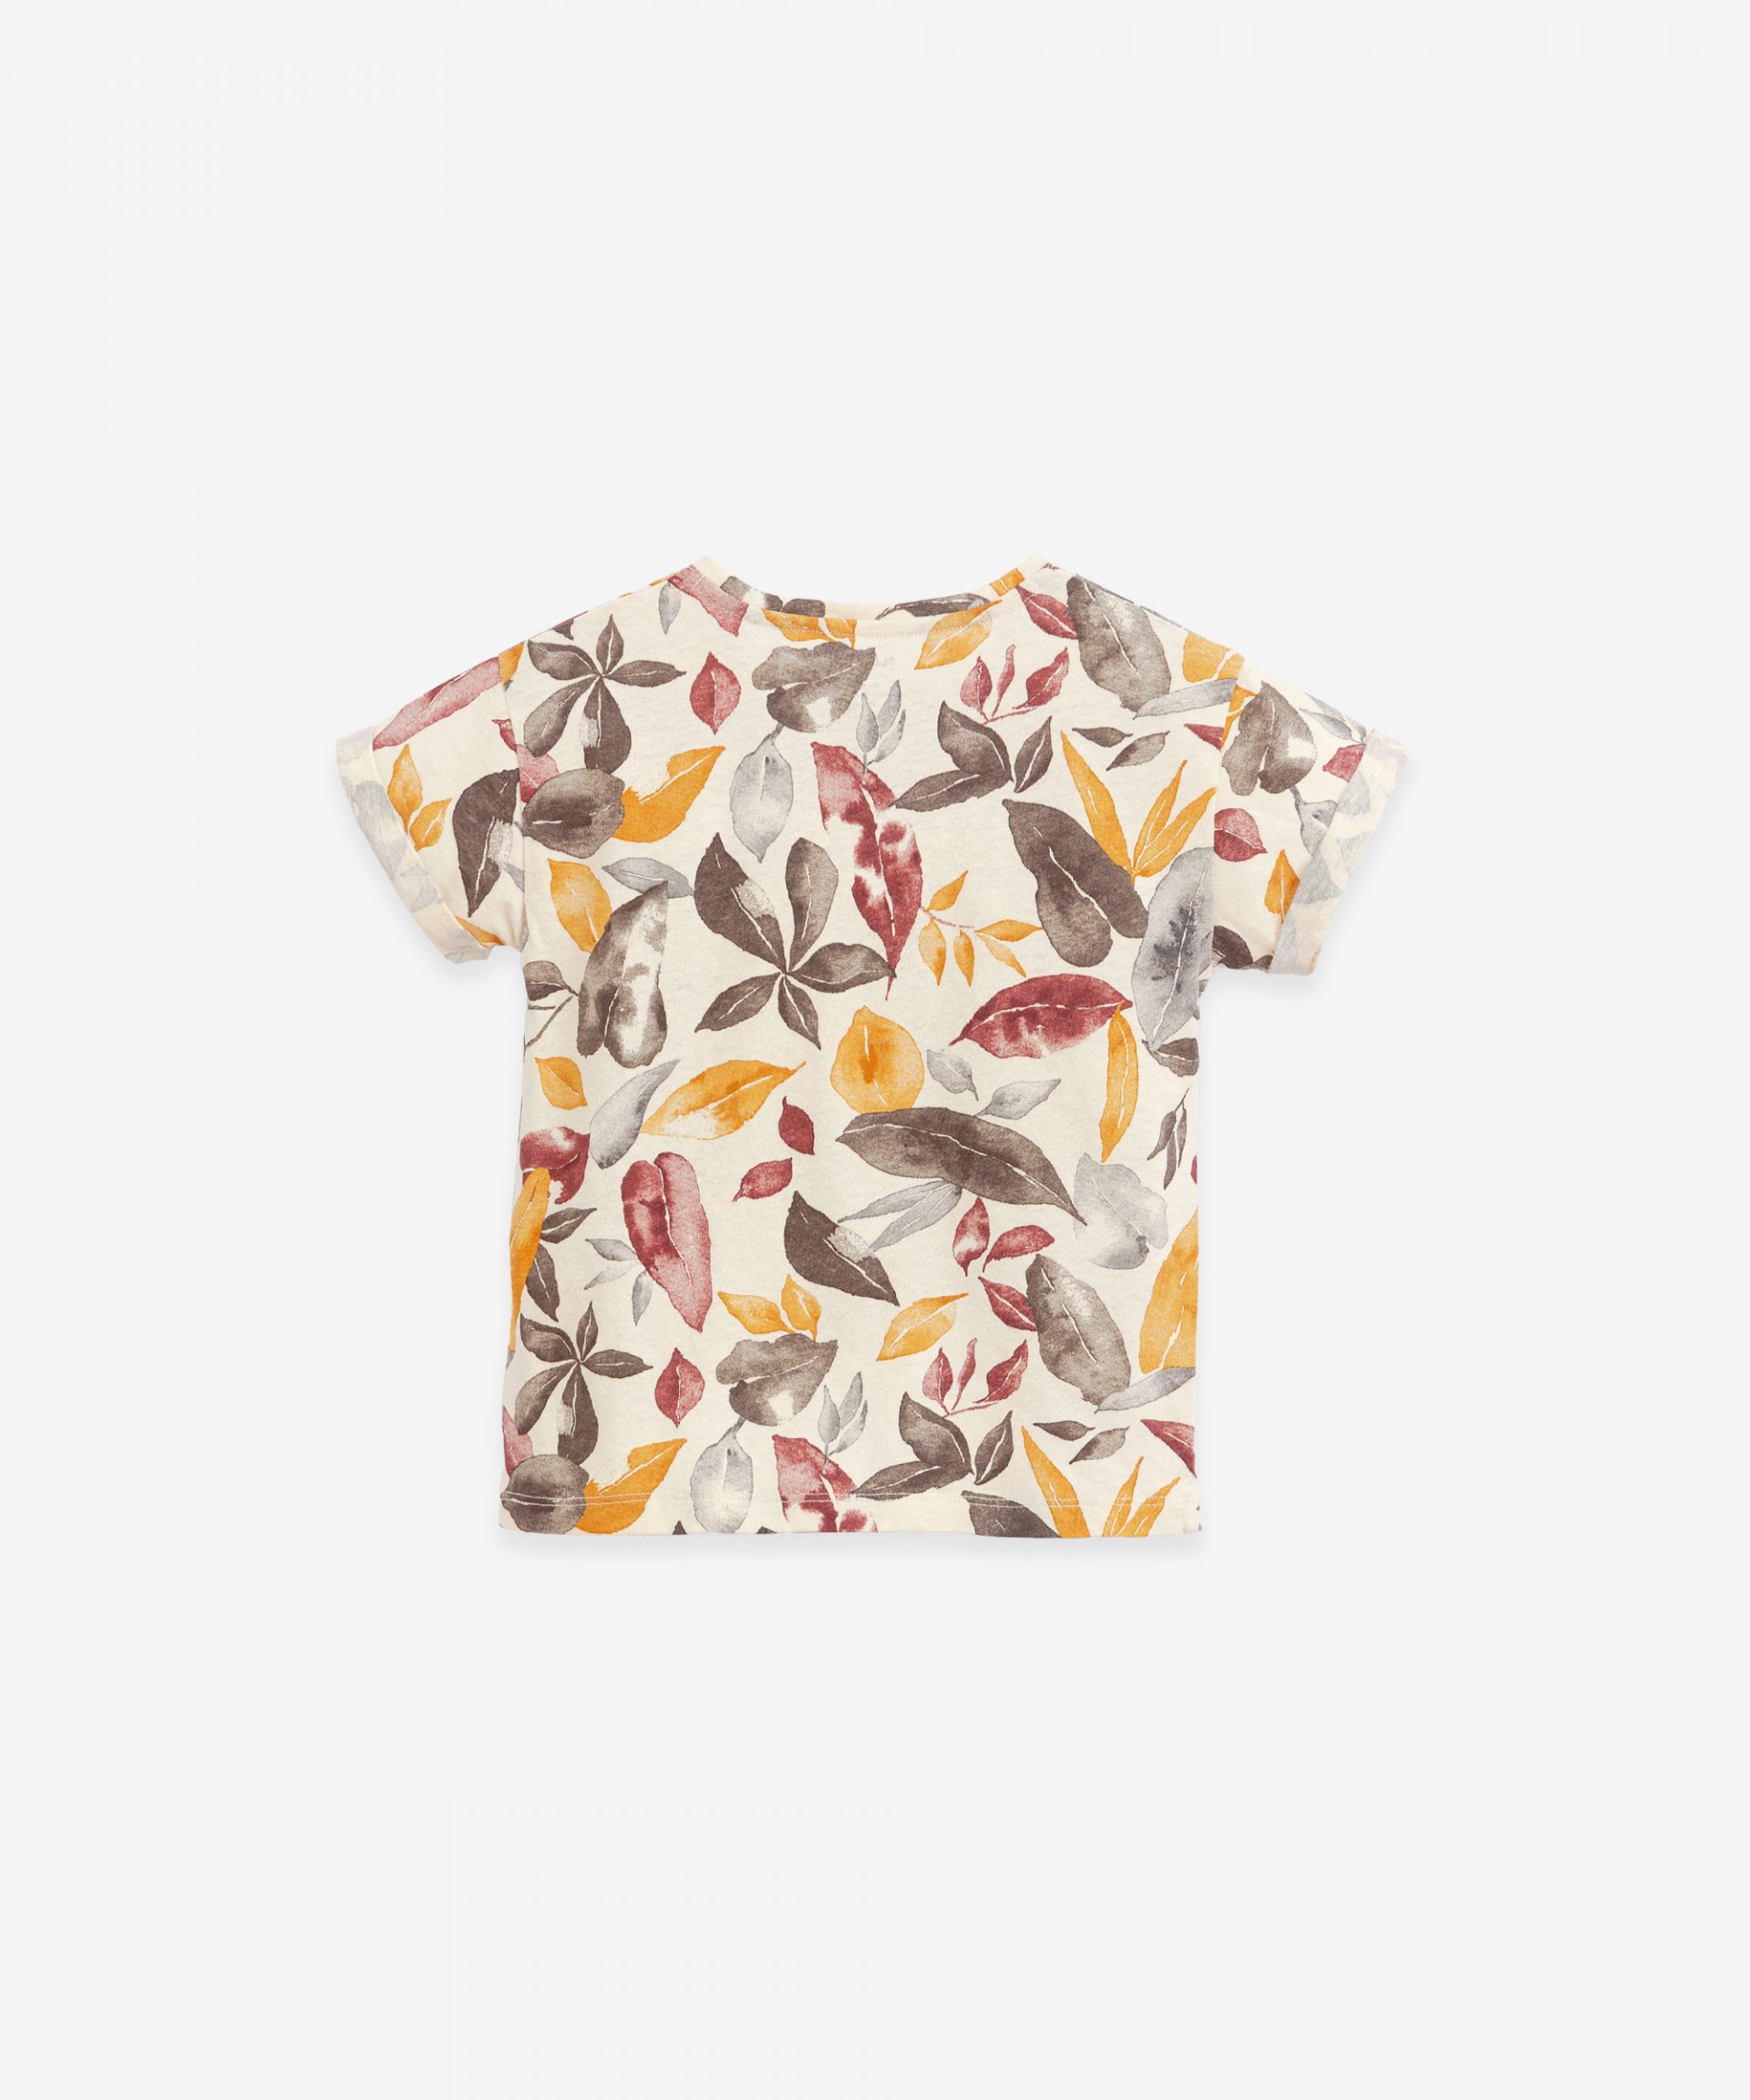 T-shirt in organic cotton and linen | Botany